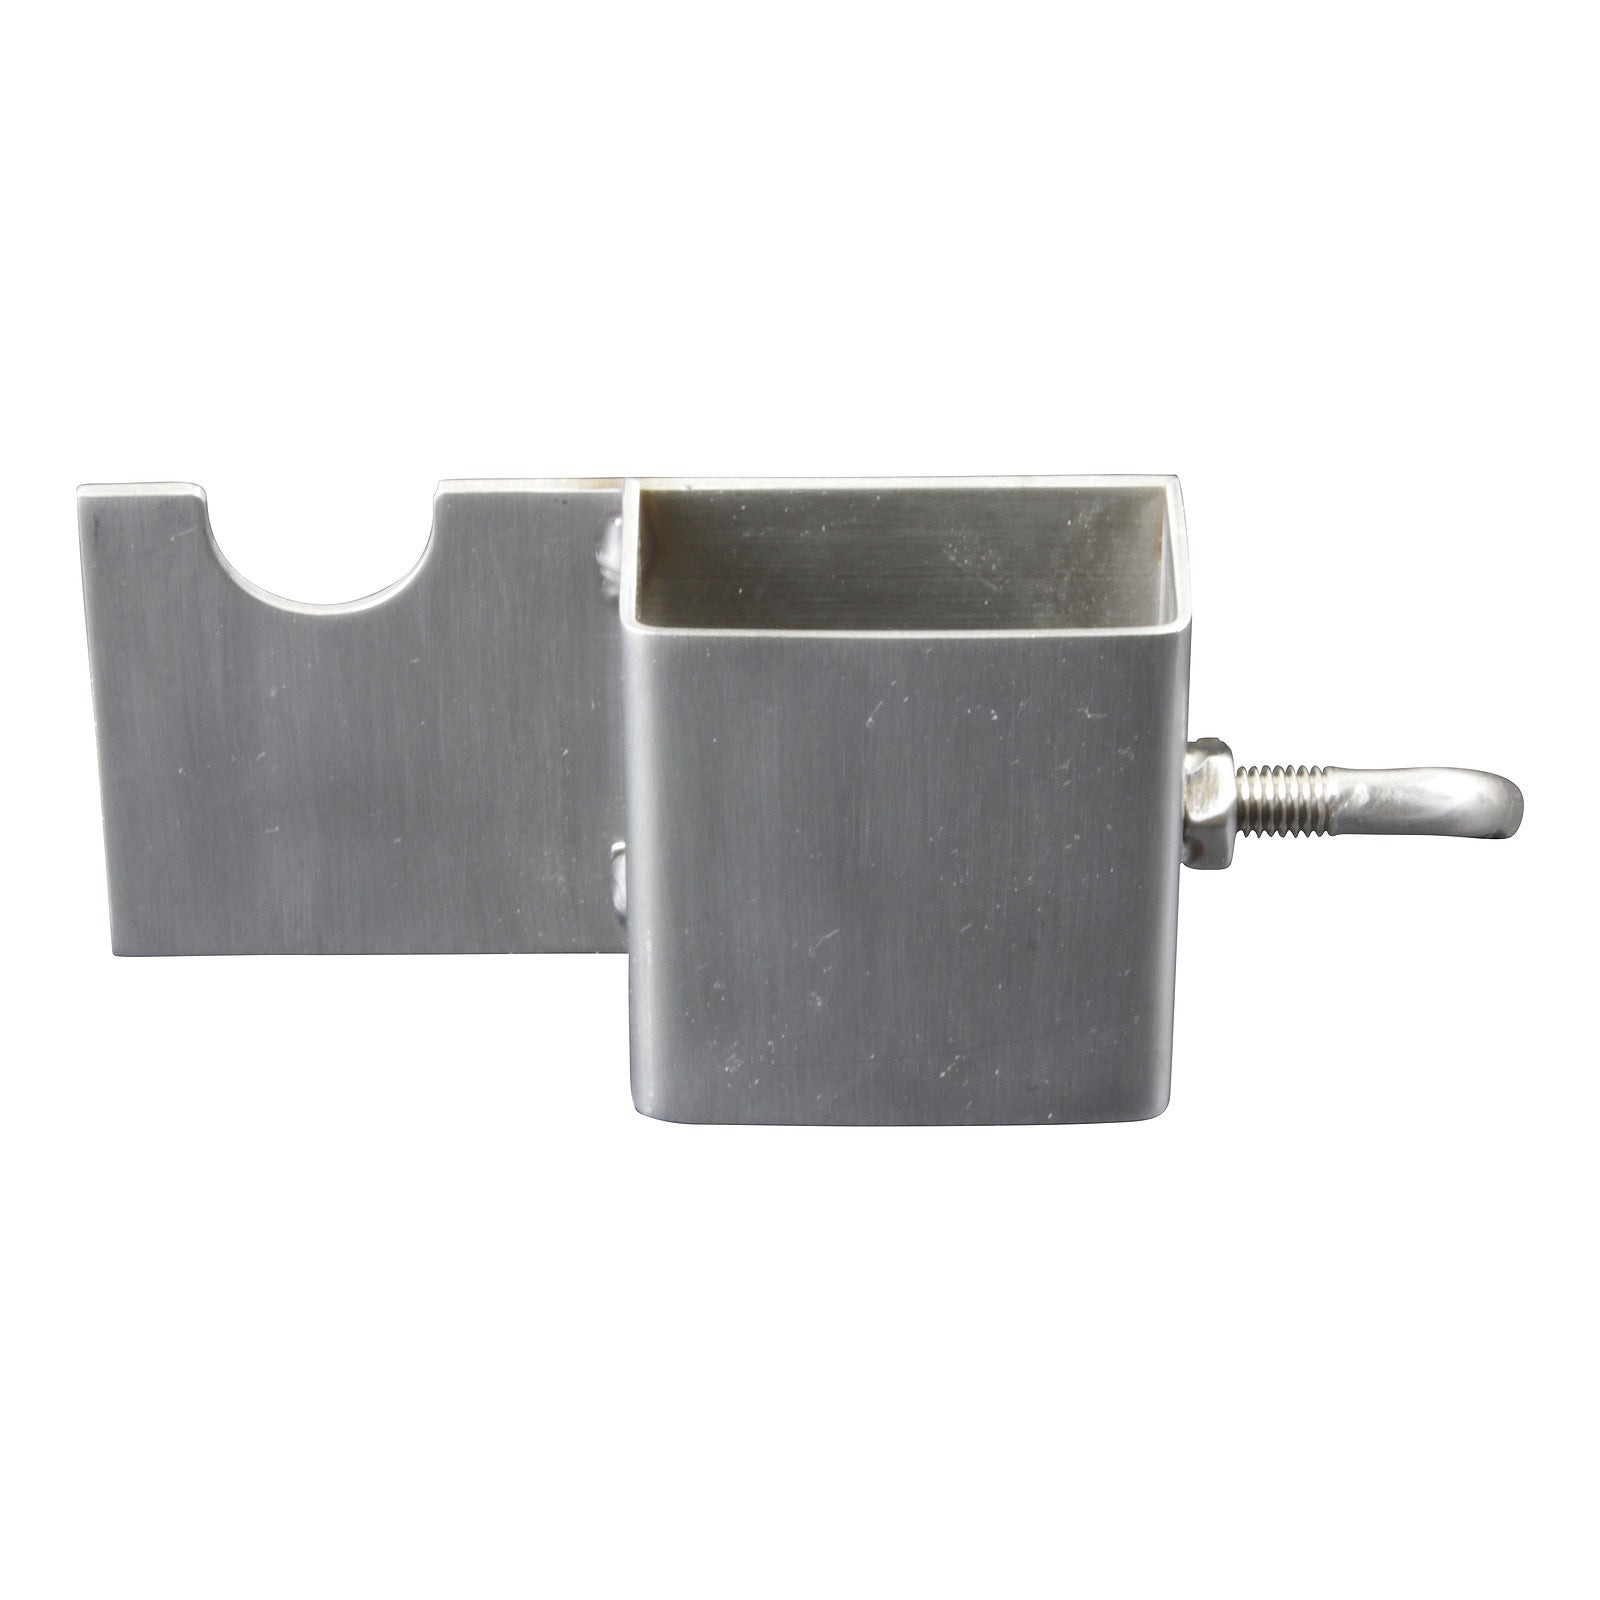 The BBQ Store Right Skewer Support Bracket Stainless Steel Suit 25kg Motor - SSB-6002R